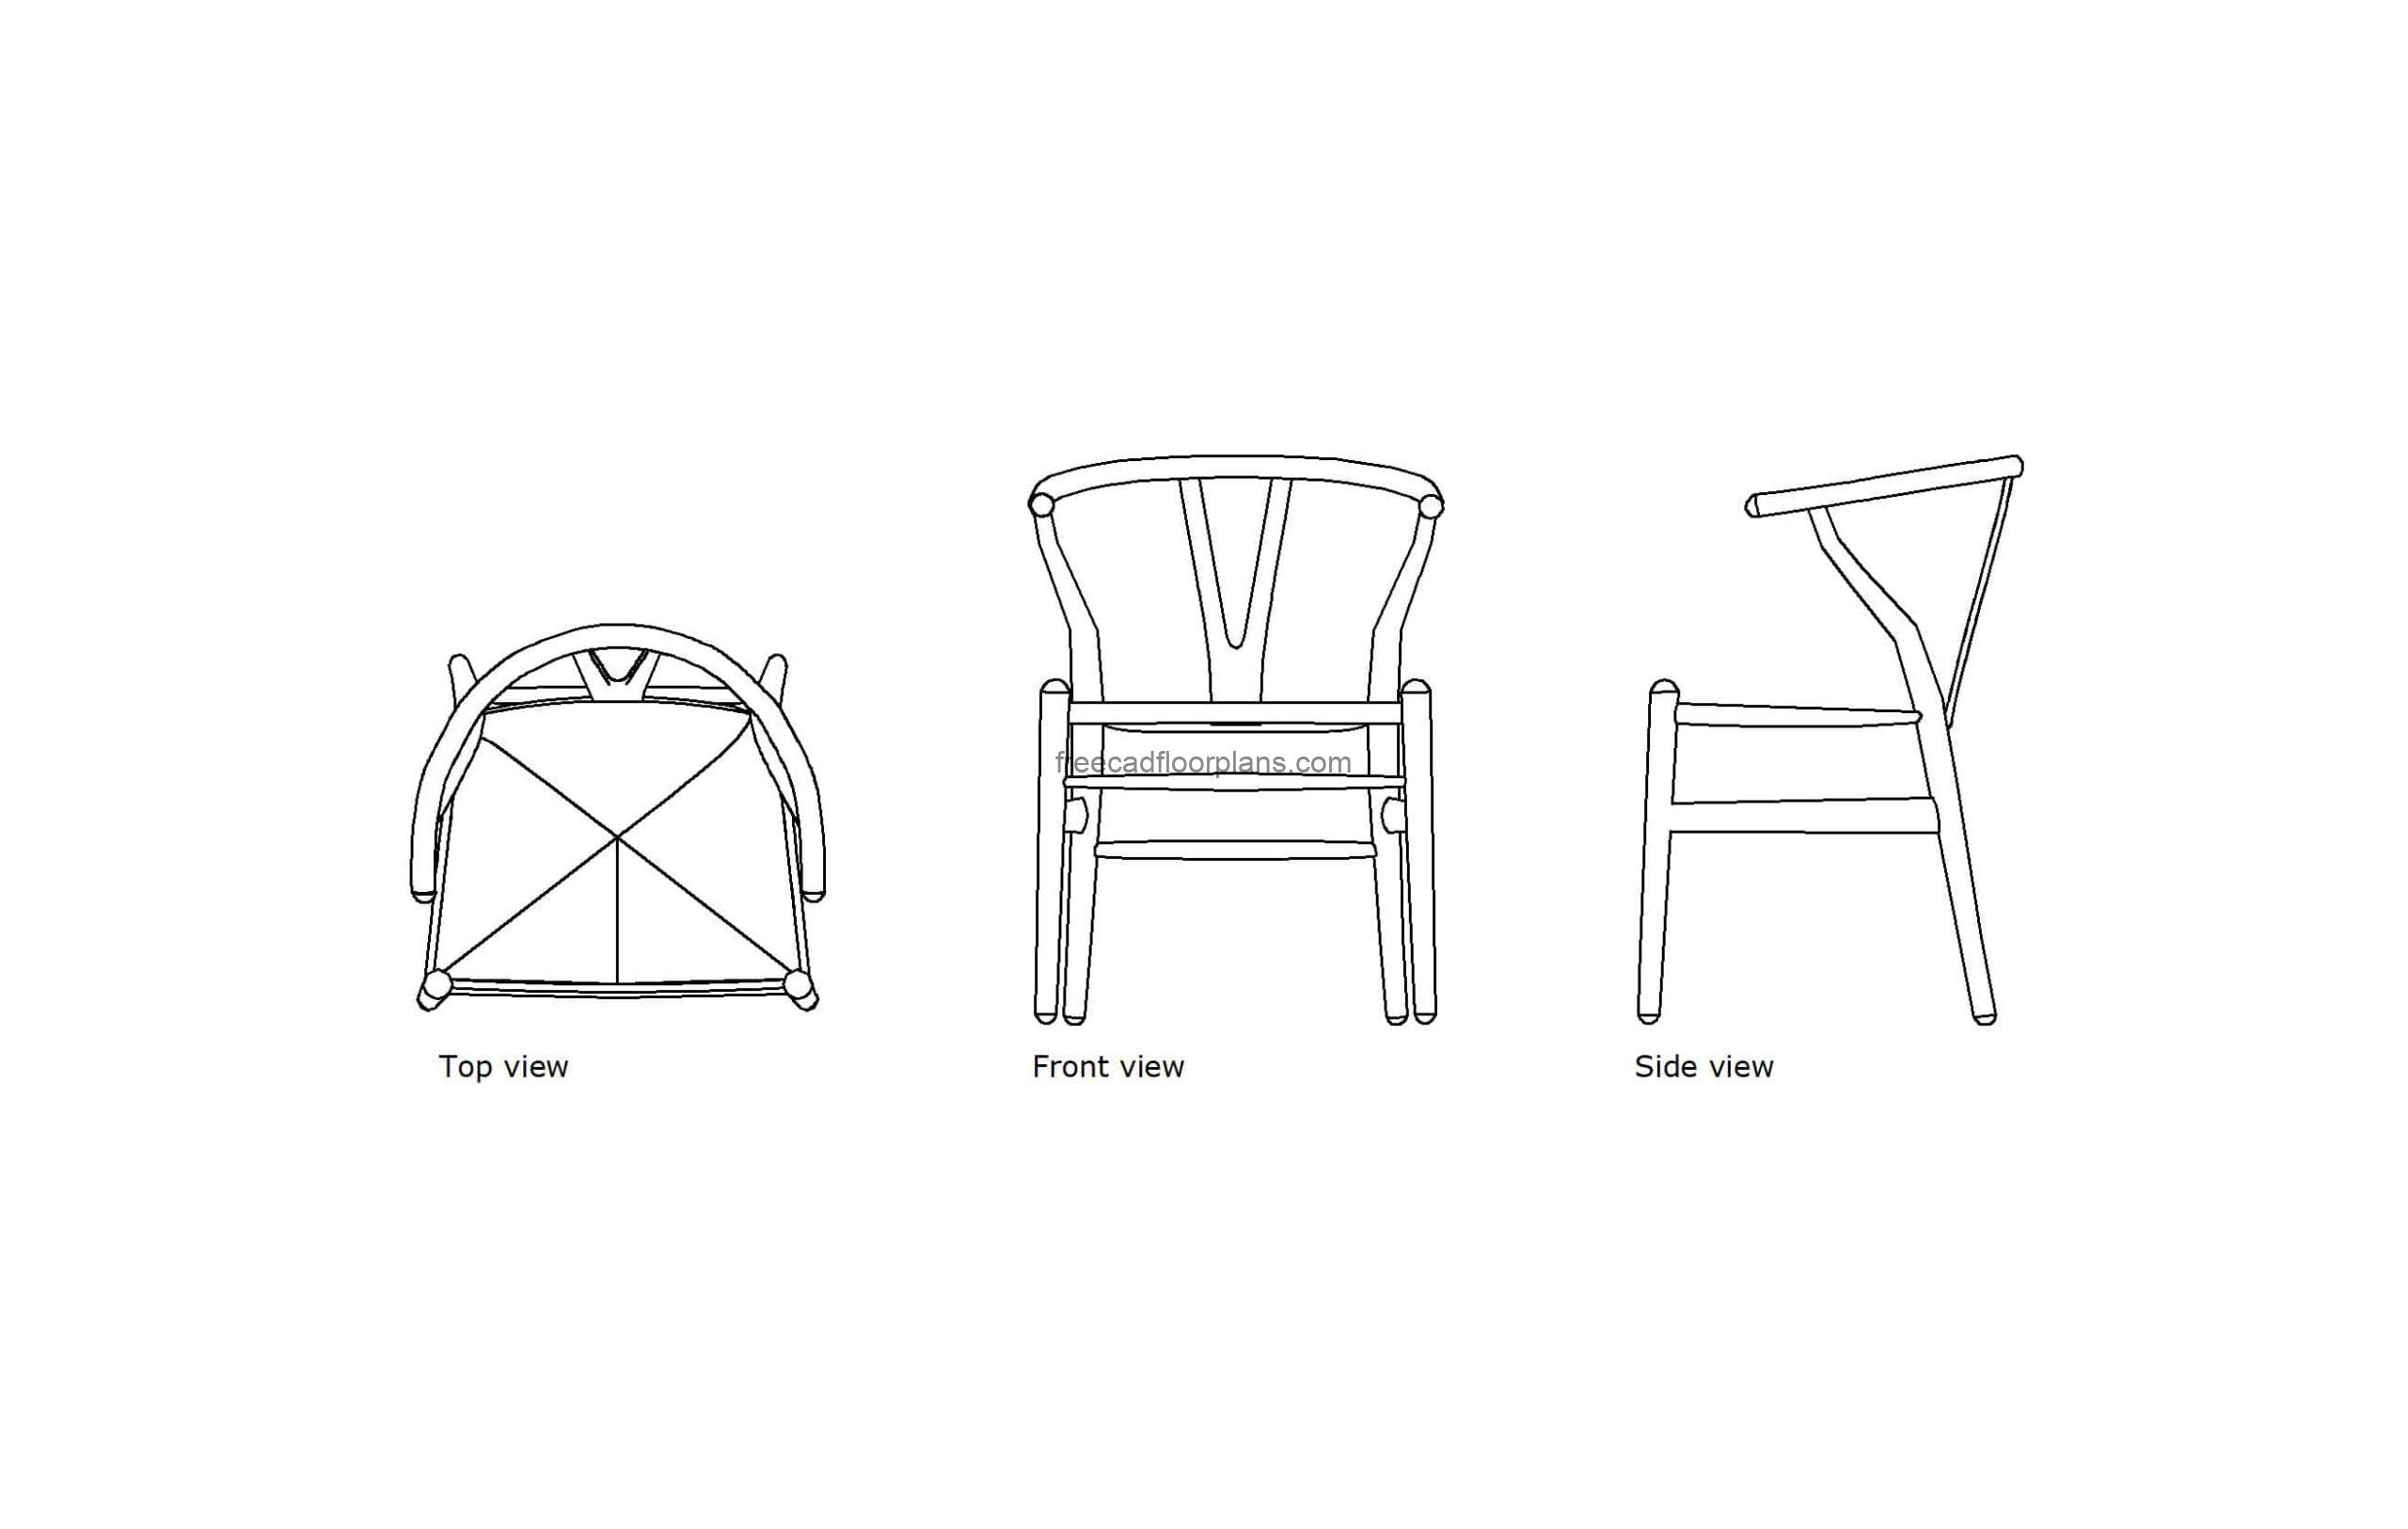 autocad drawing of a wishbone chair, plan and elevation views, dwg file for free download